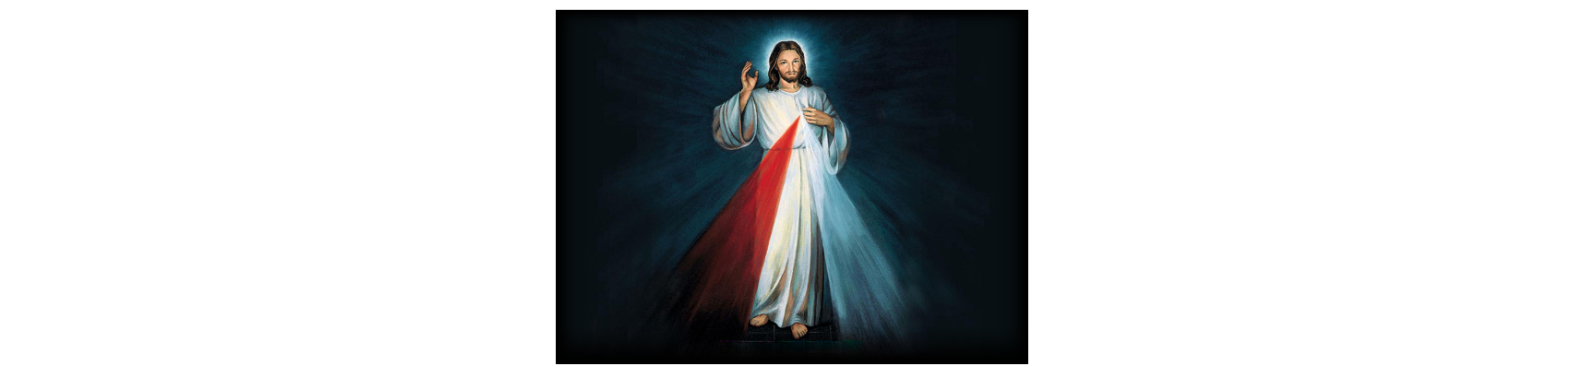 Image of Jesus showing the Sacred Heart